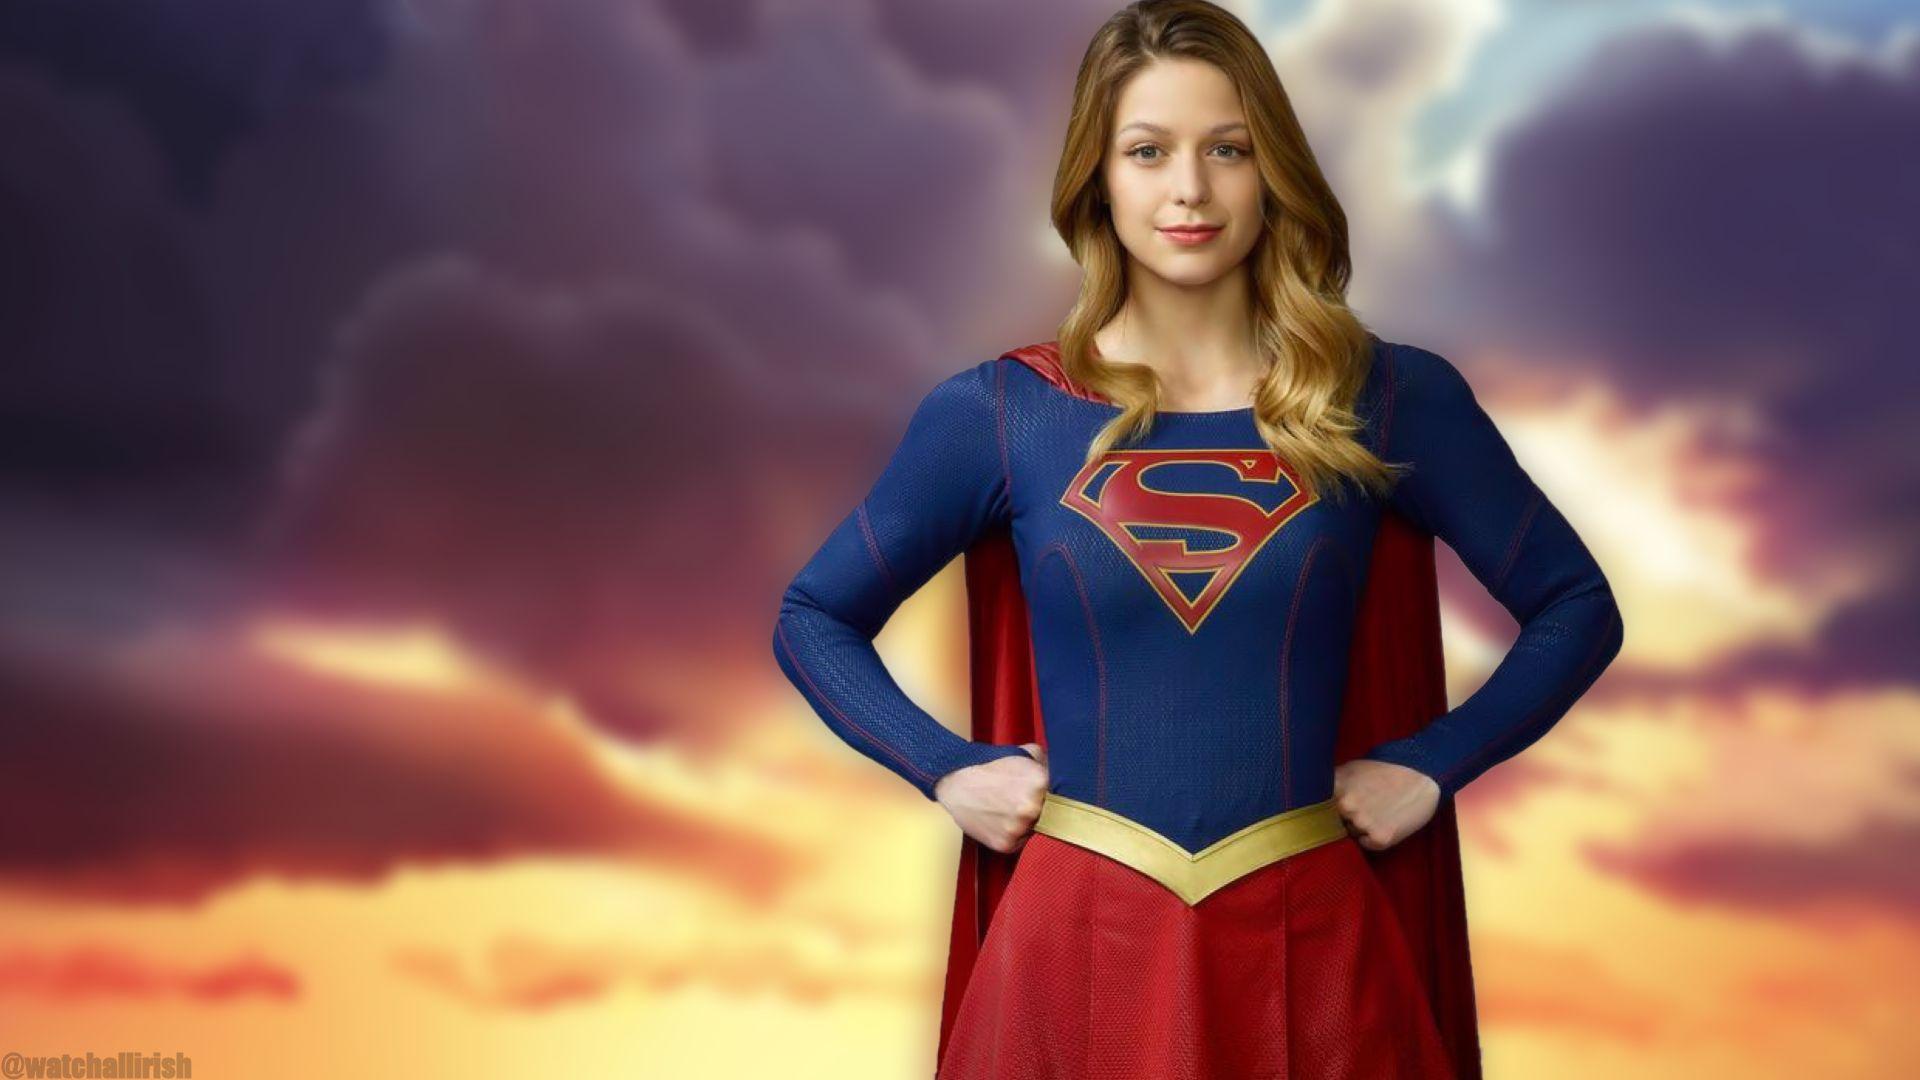 Best 47+ Supergirl Wallpapers on HipWallpapers.